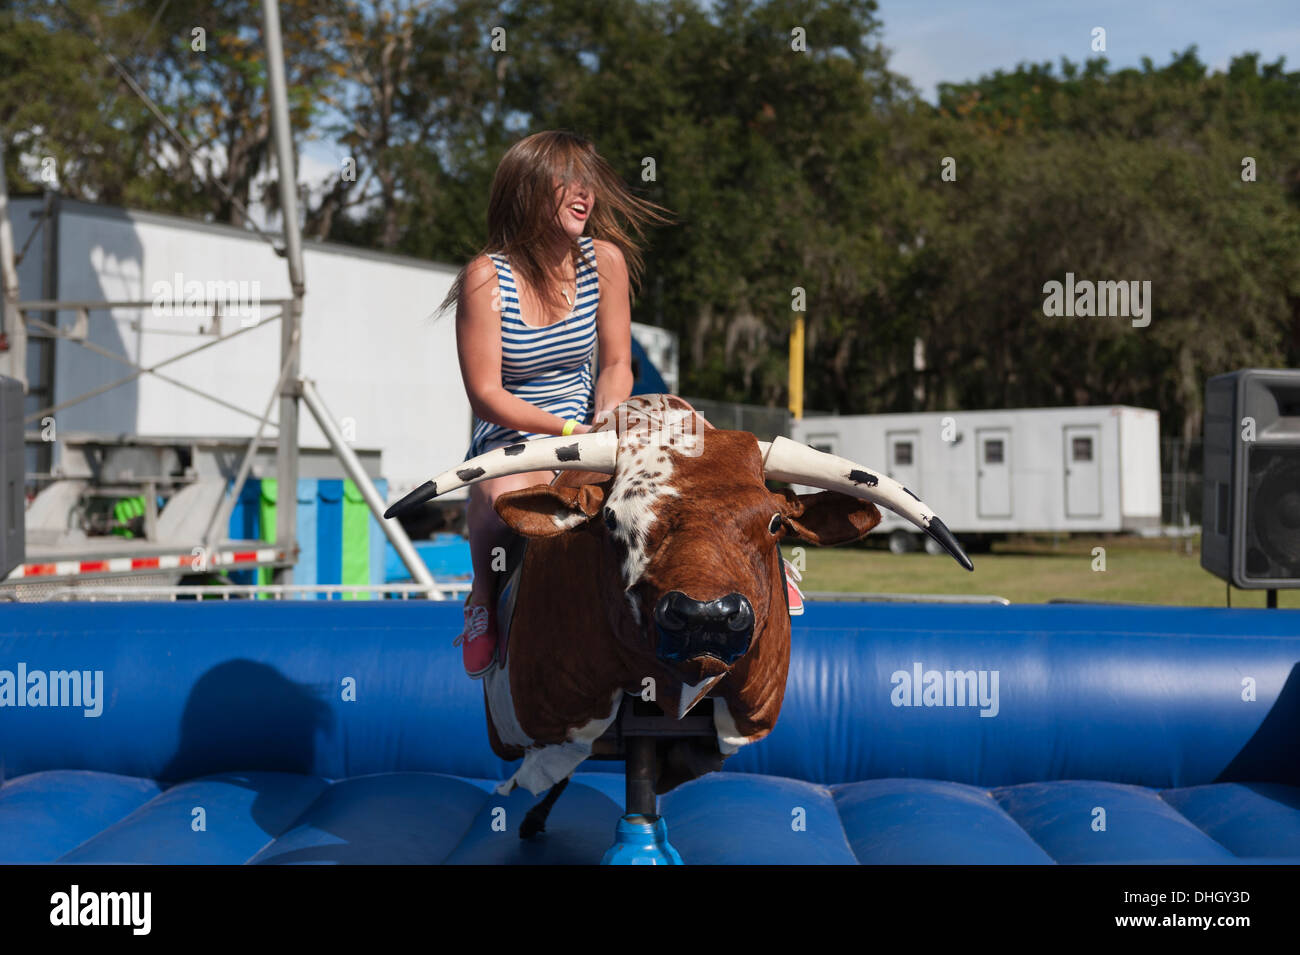 A teenager riding a mechanical Bull at a Carnival in Central Florida USA Stock Photo